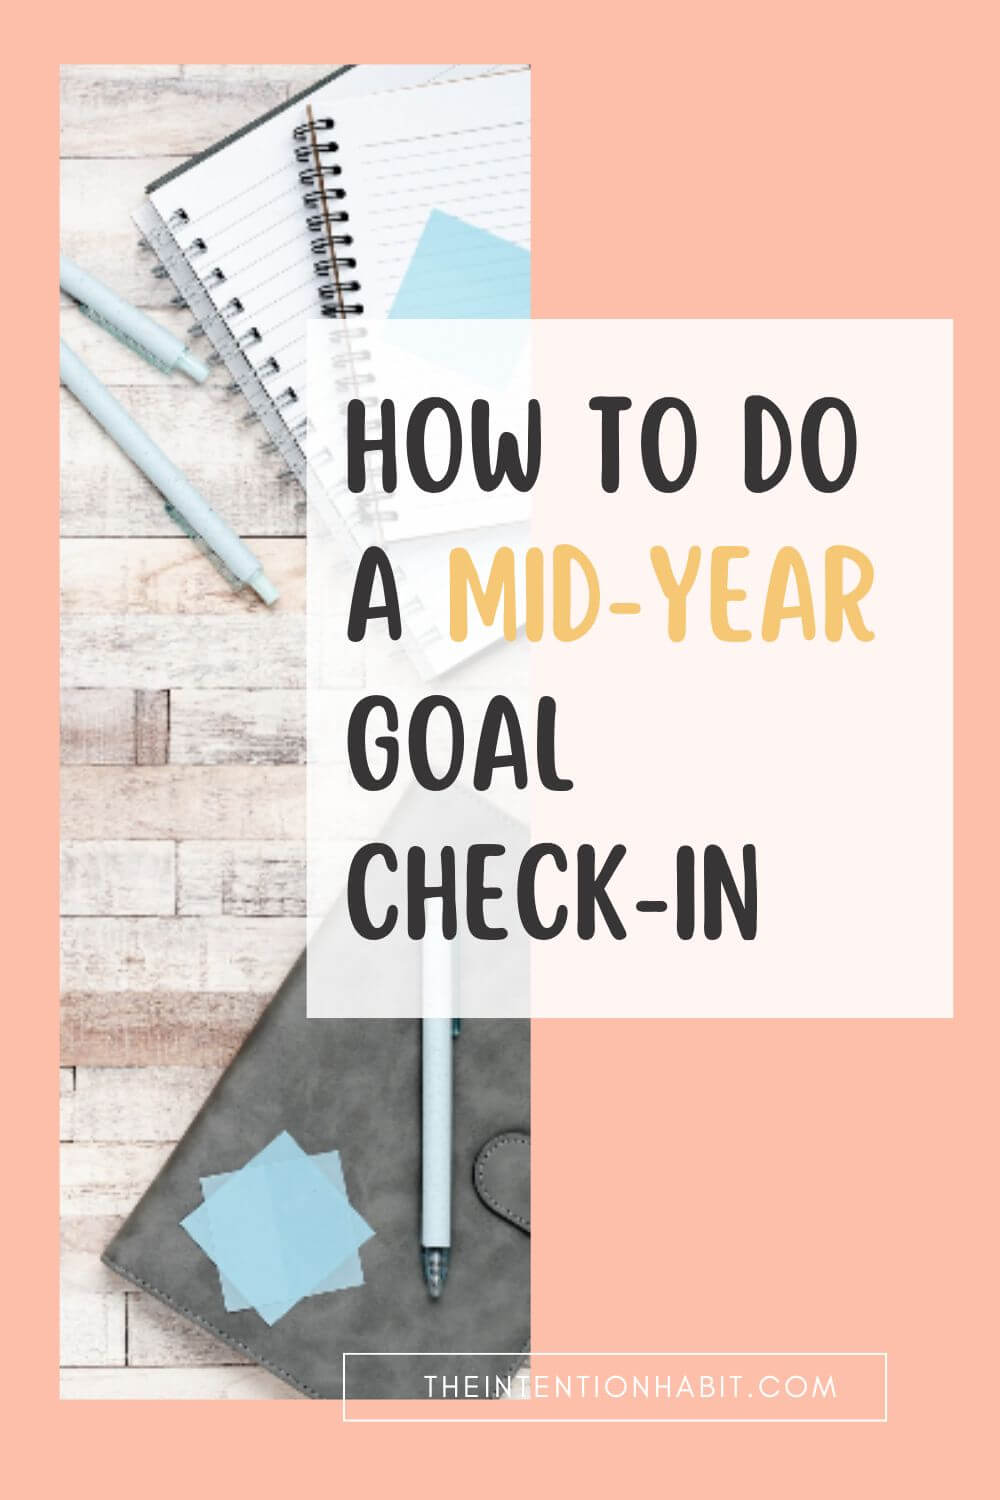 how to do a mid-year goal check in pinterest image.